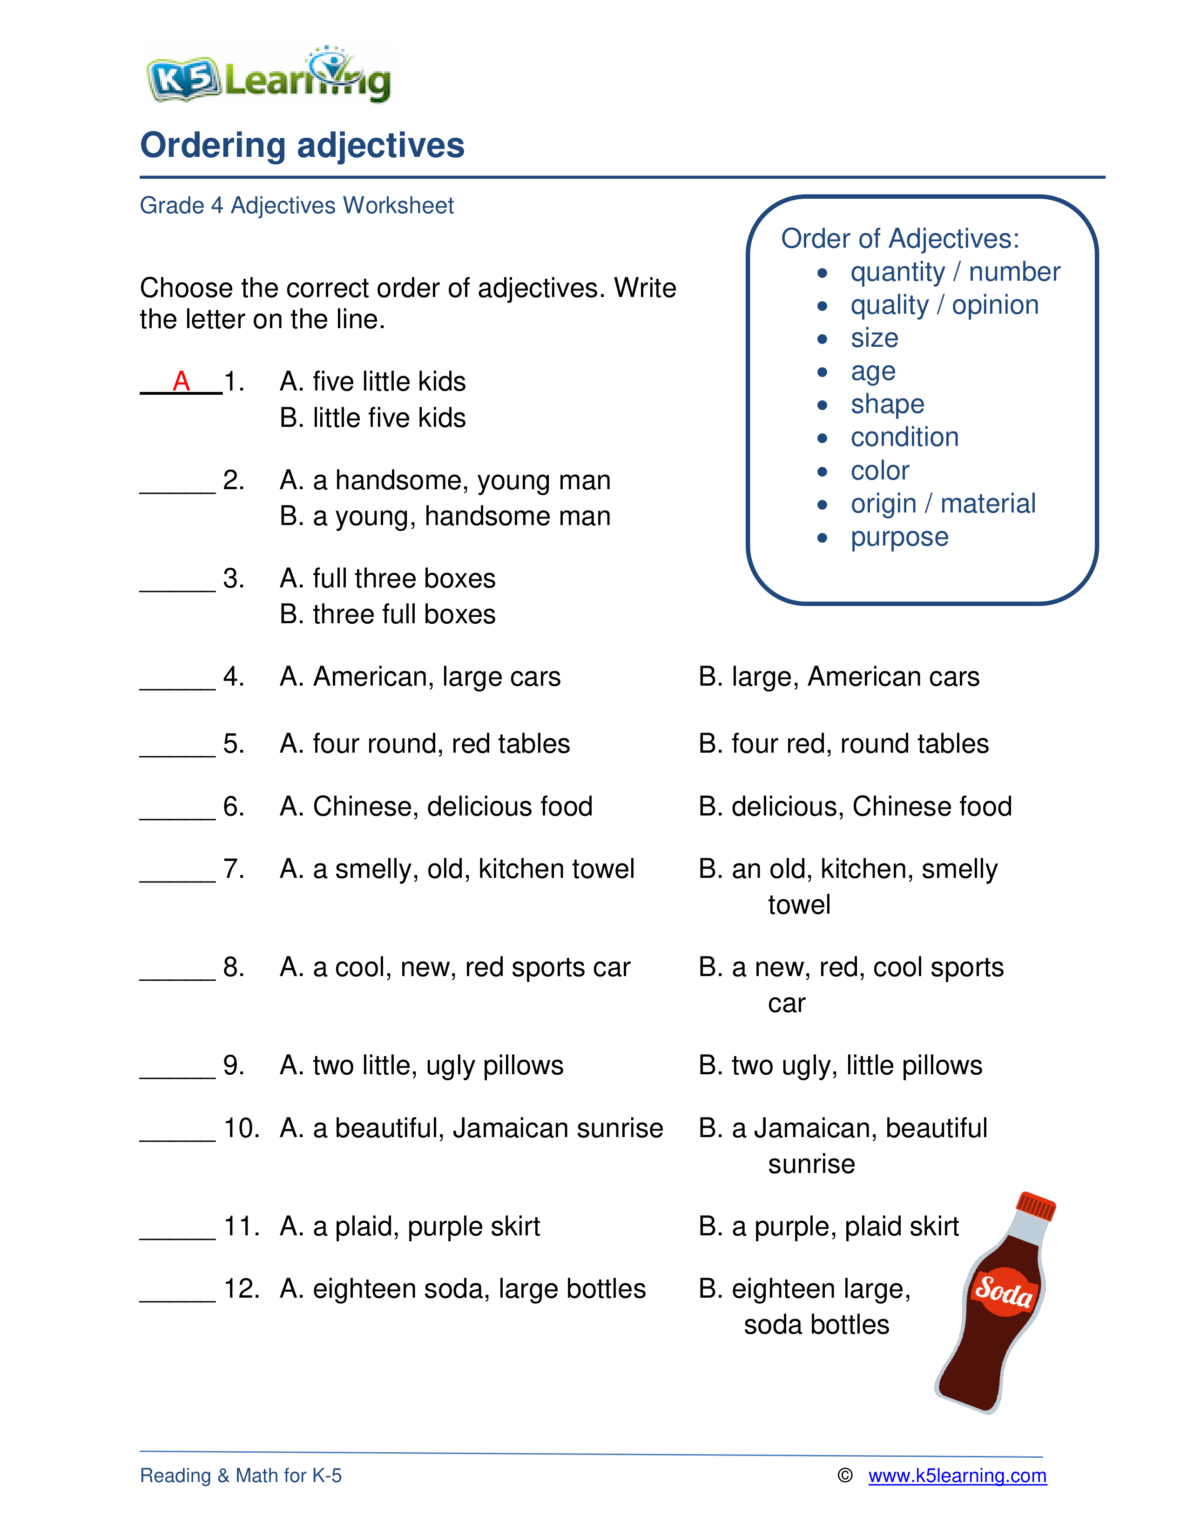 Worksheets With Adjectives Adjectiveworksheets Net